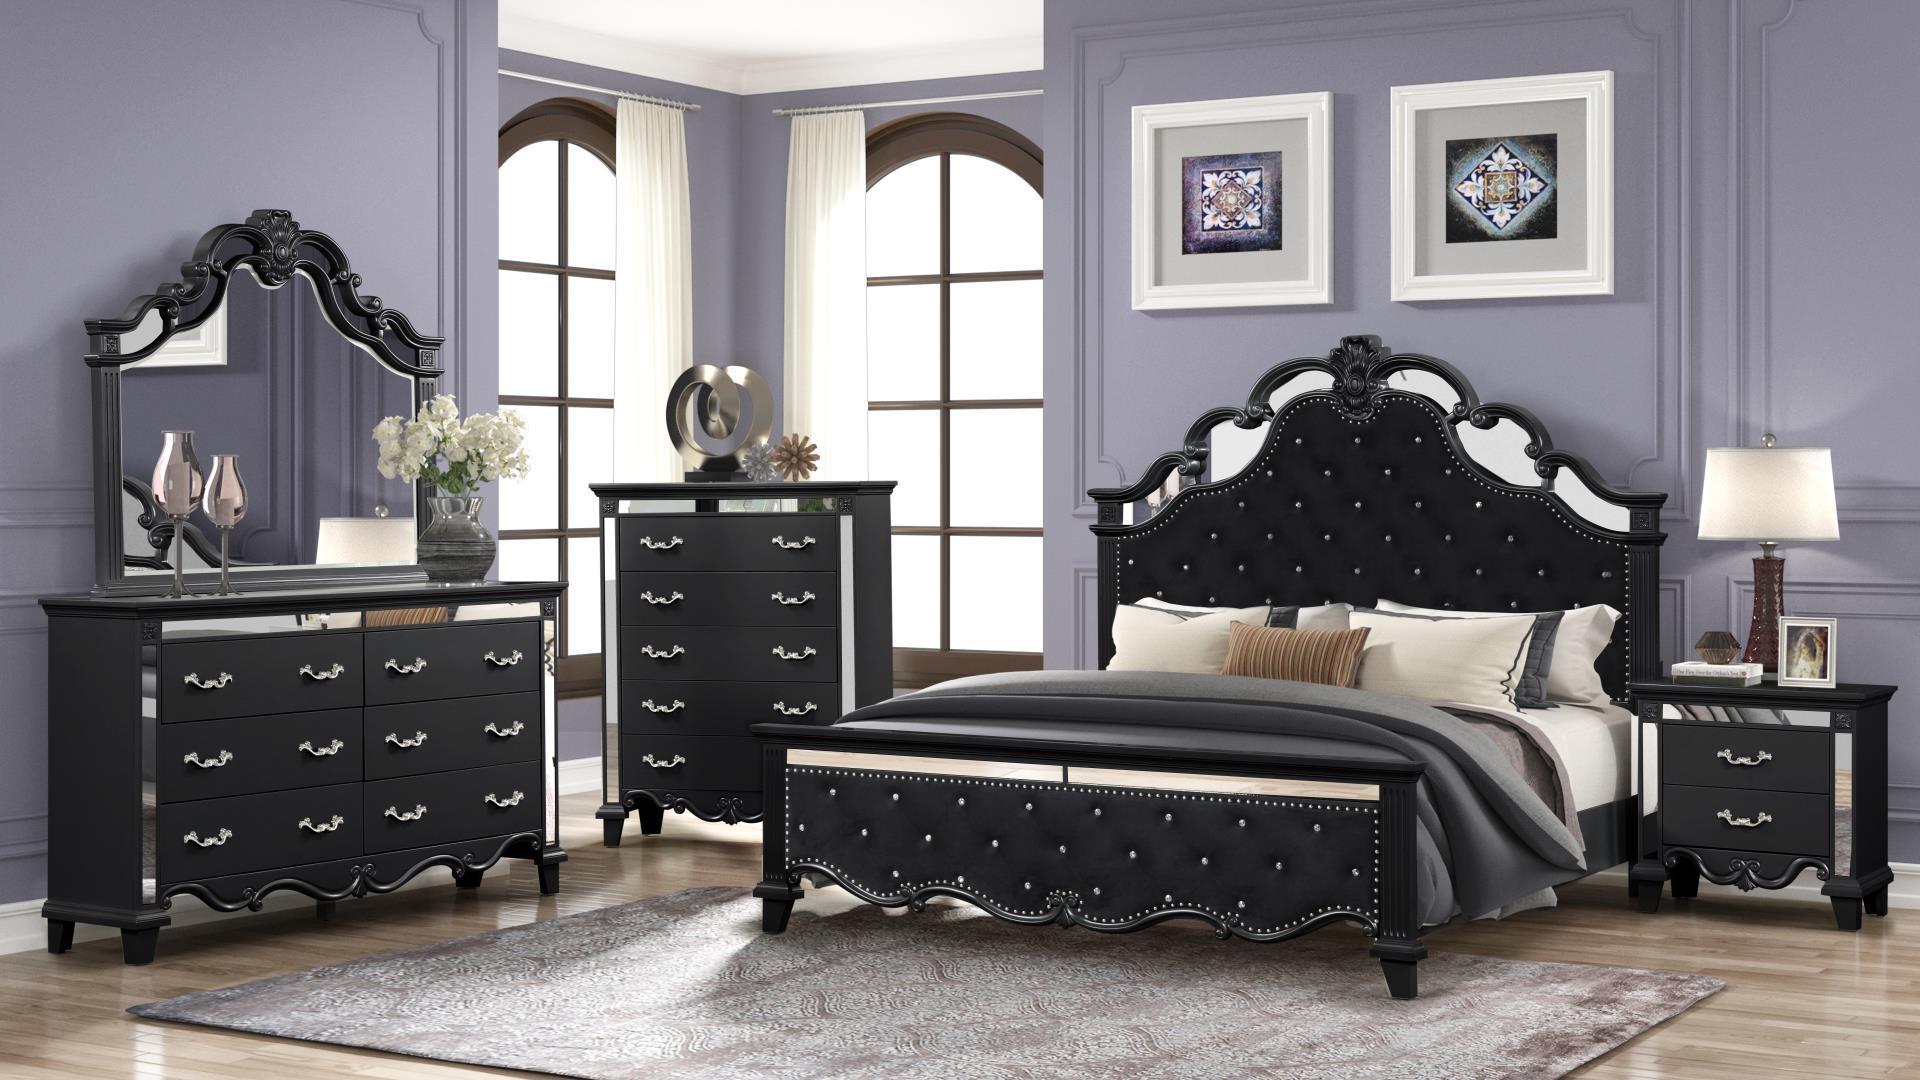 

    
Glam Black Tufted Queen Bedroom Set 5P MILAN Galaxy Home Contemporary Modern
